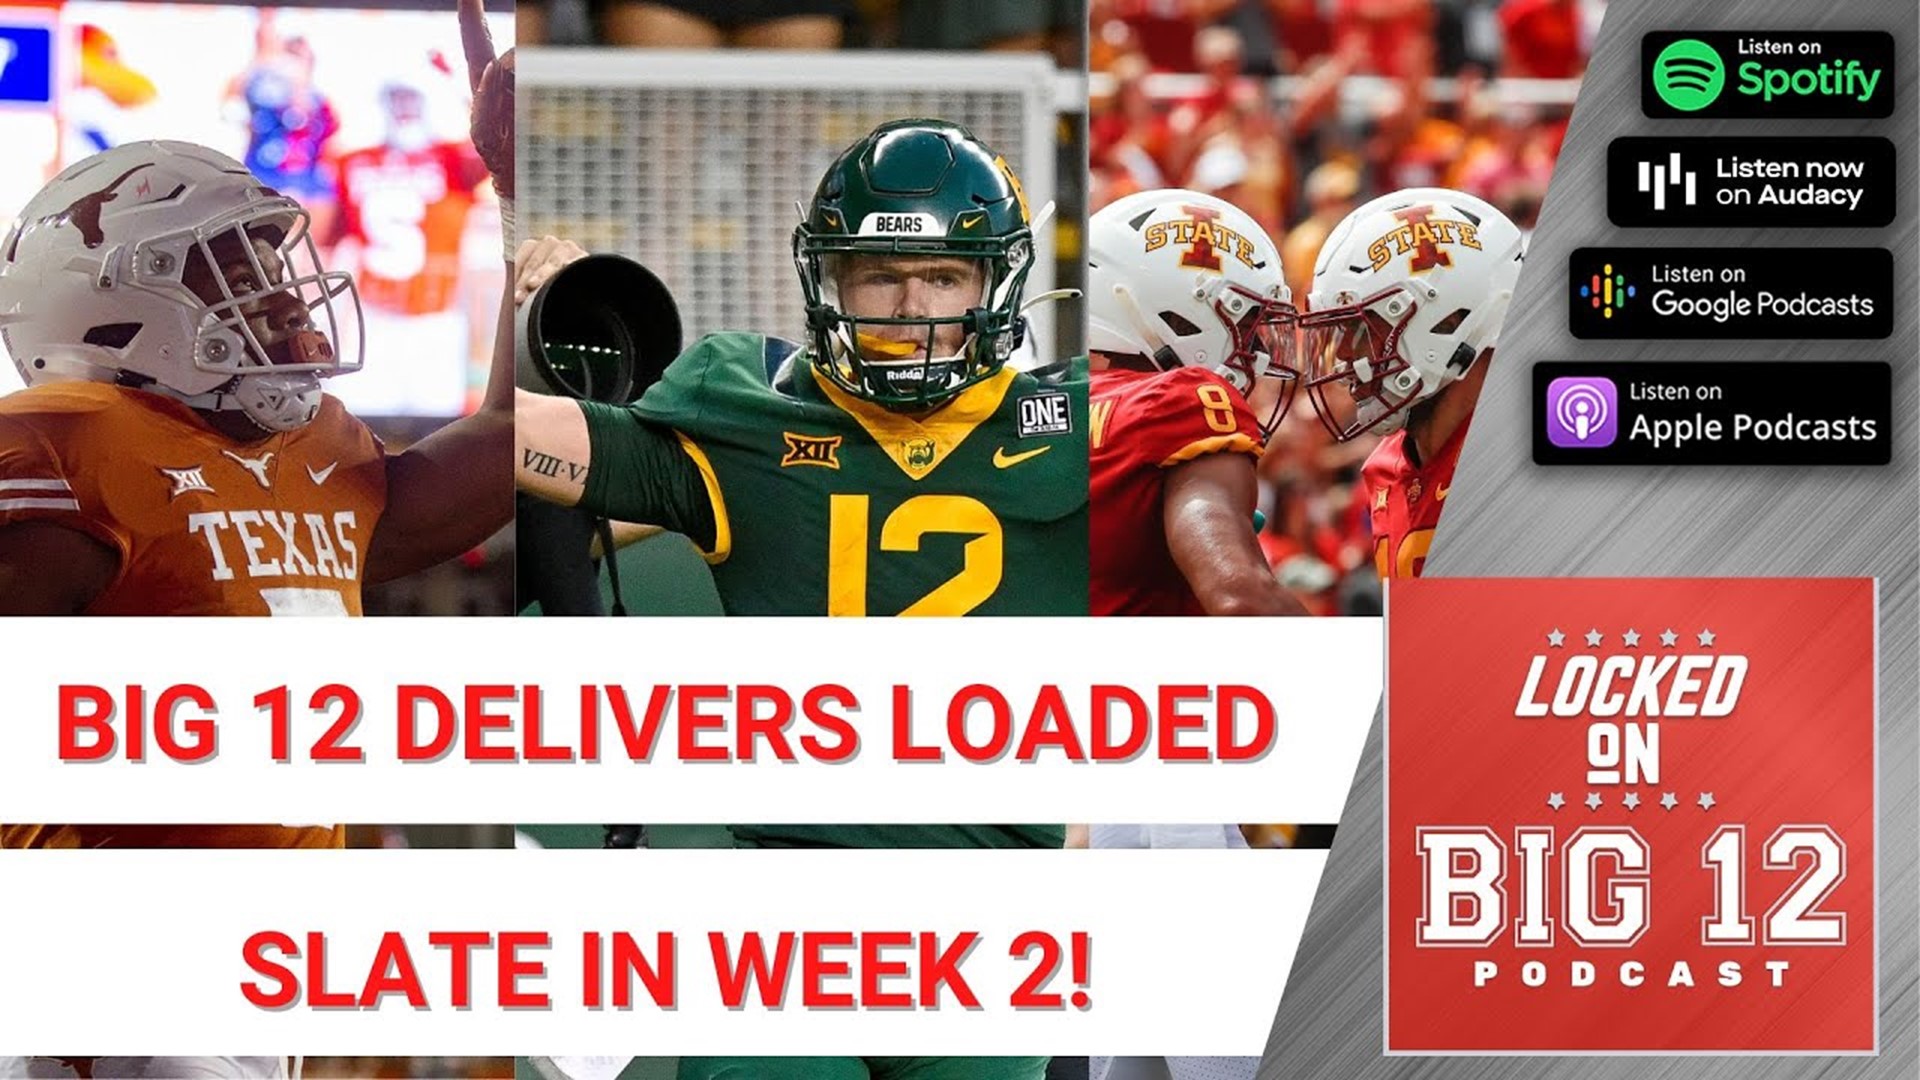 Does Texas Have A Shot Against Alabama? Can Baylor Win in Provo? - A Loaded Big 12 Week 2 Preview